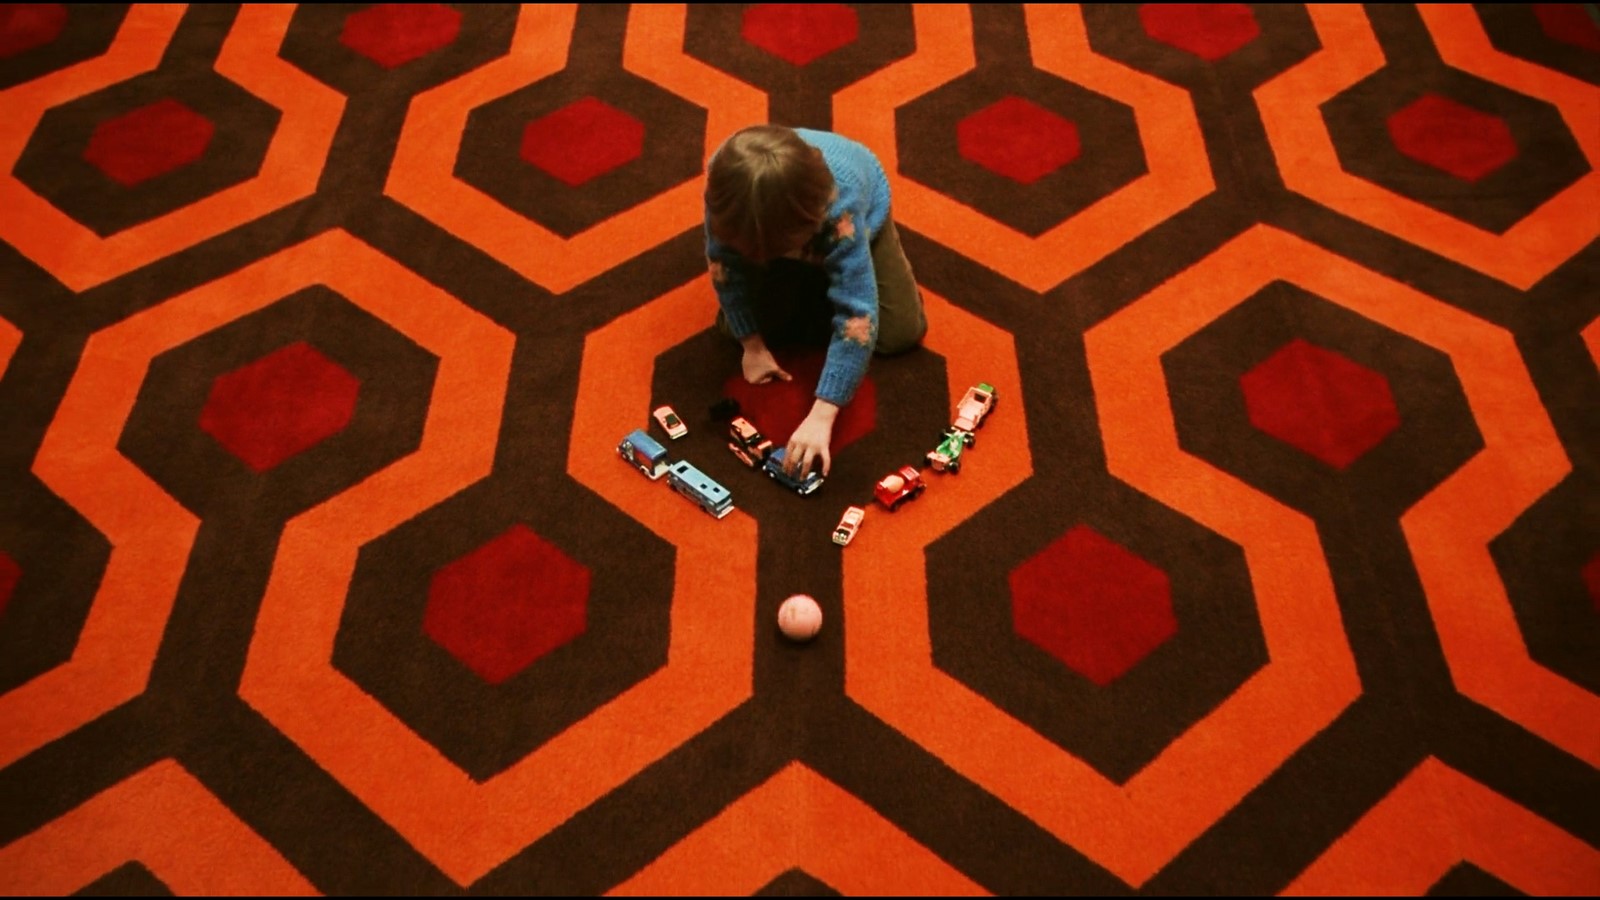 An architectural review of The Shining  - Sheet3